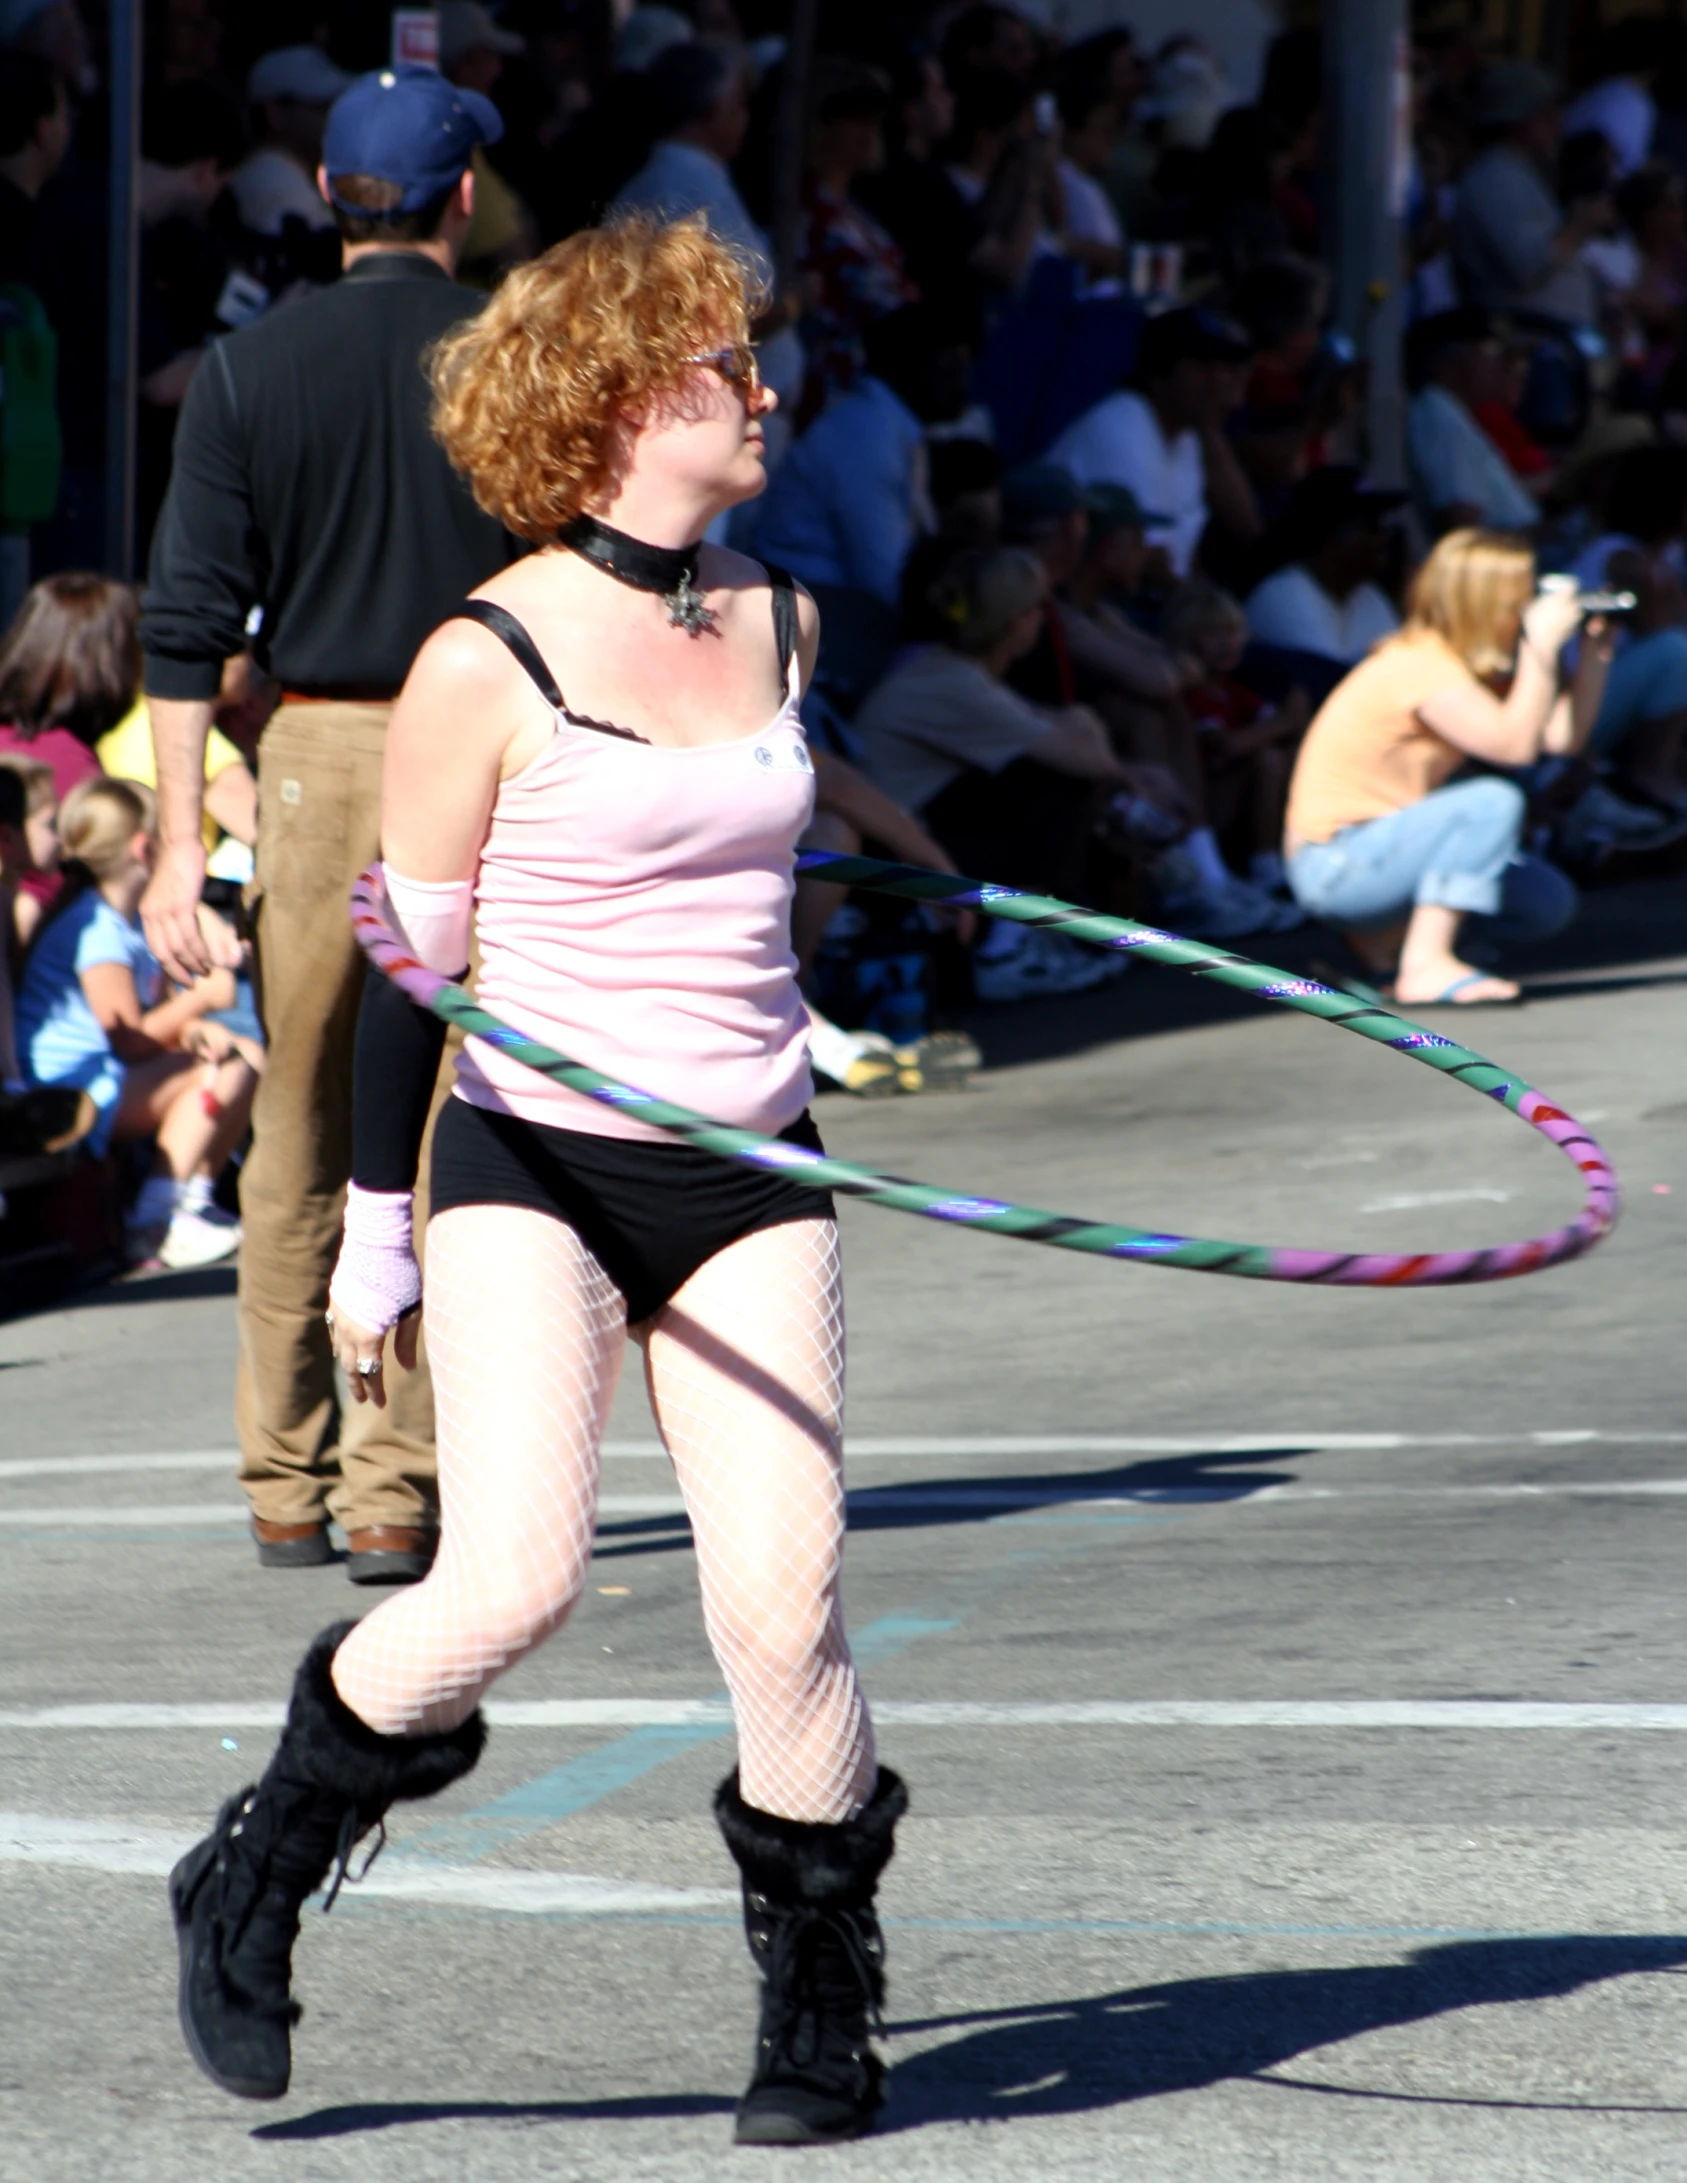 a woman in underwear and a pink top playing with a colorful hula hoop